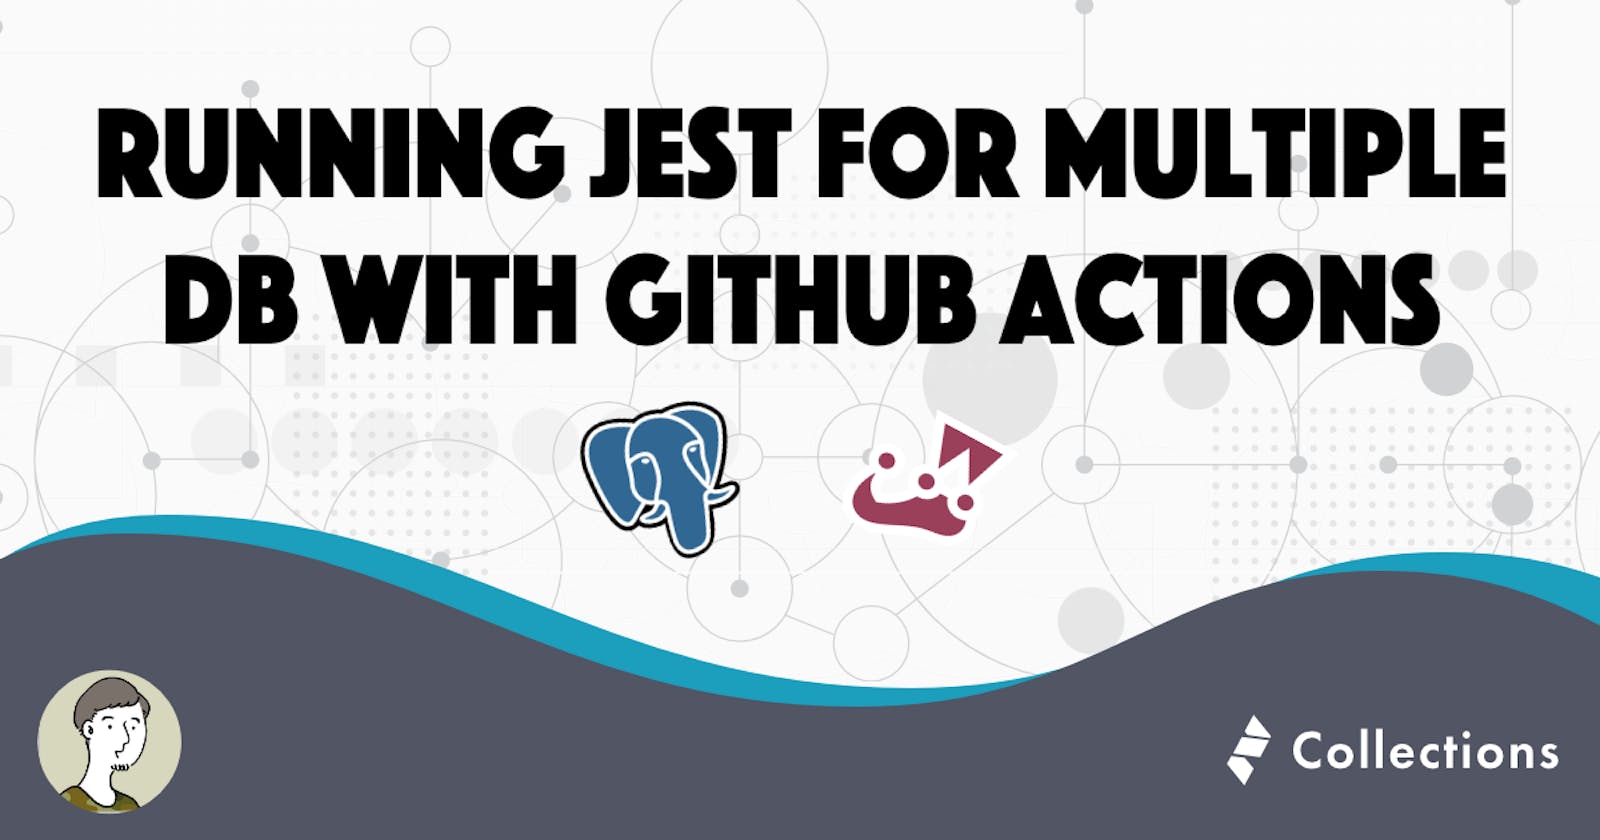 Running Jest for multiple DB with GitHub Actions